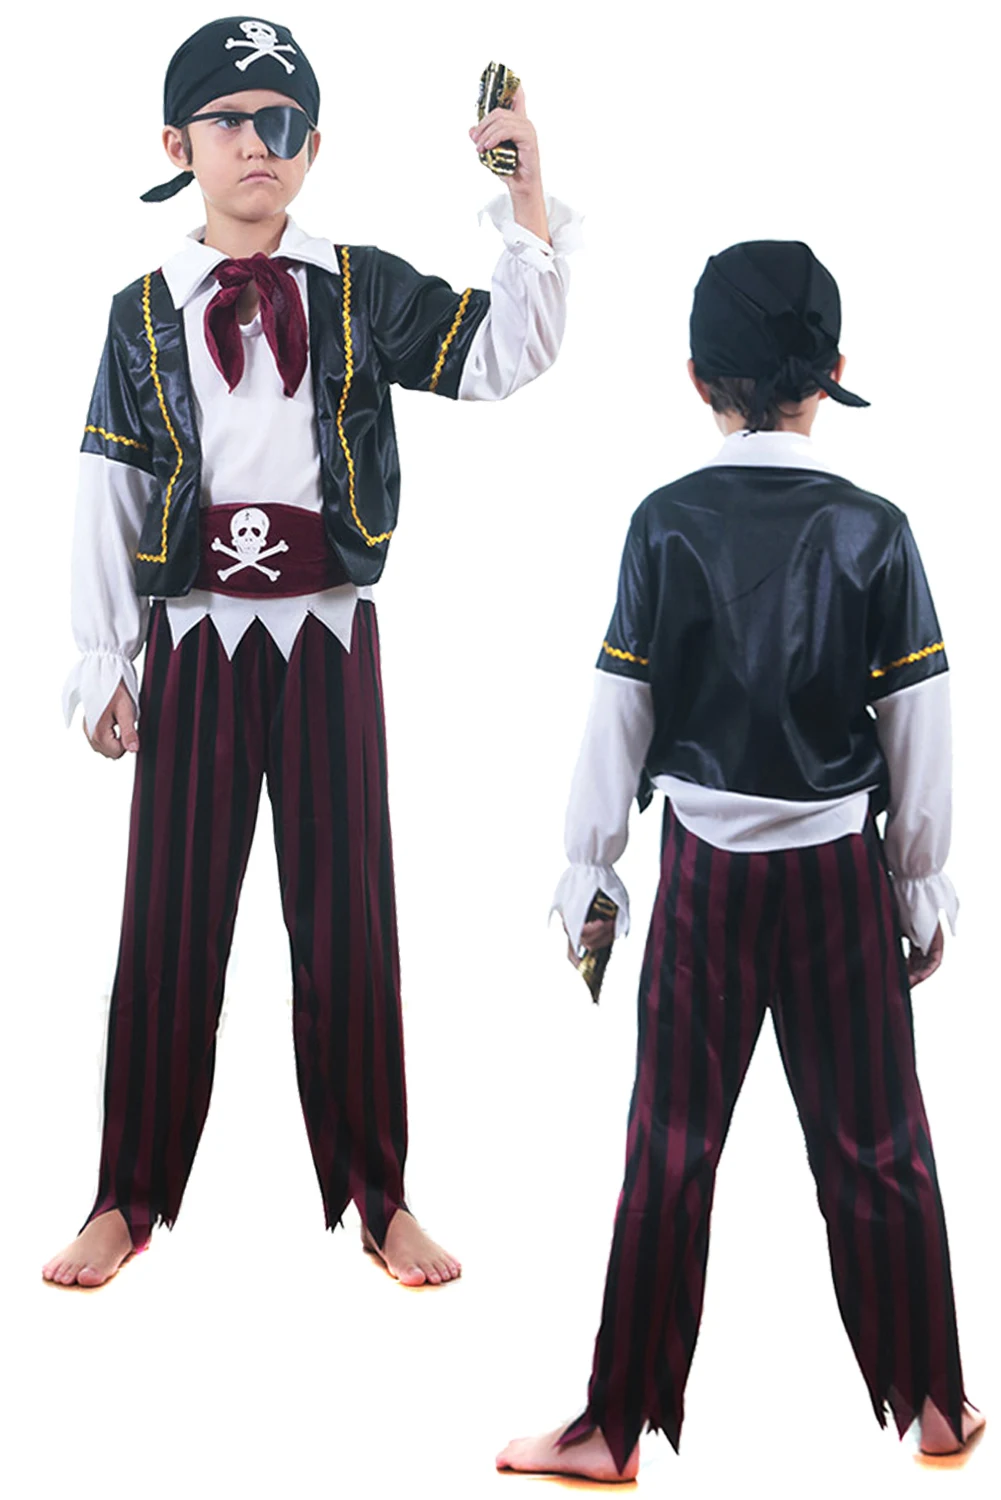 

Pirate Cosplay Kids Boys Role Play Outfits Funny Halloween Costume Child Roleplay Fantasy Fancy Dress Up Party Clothes